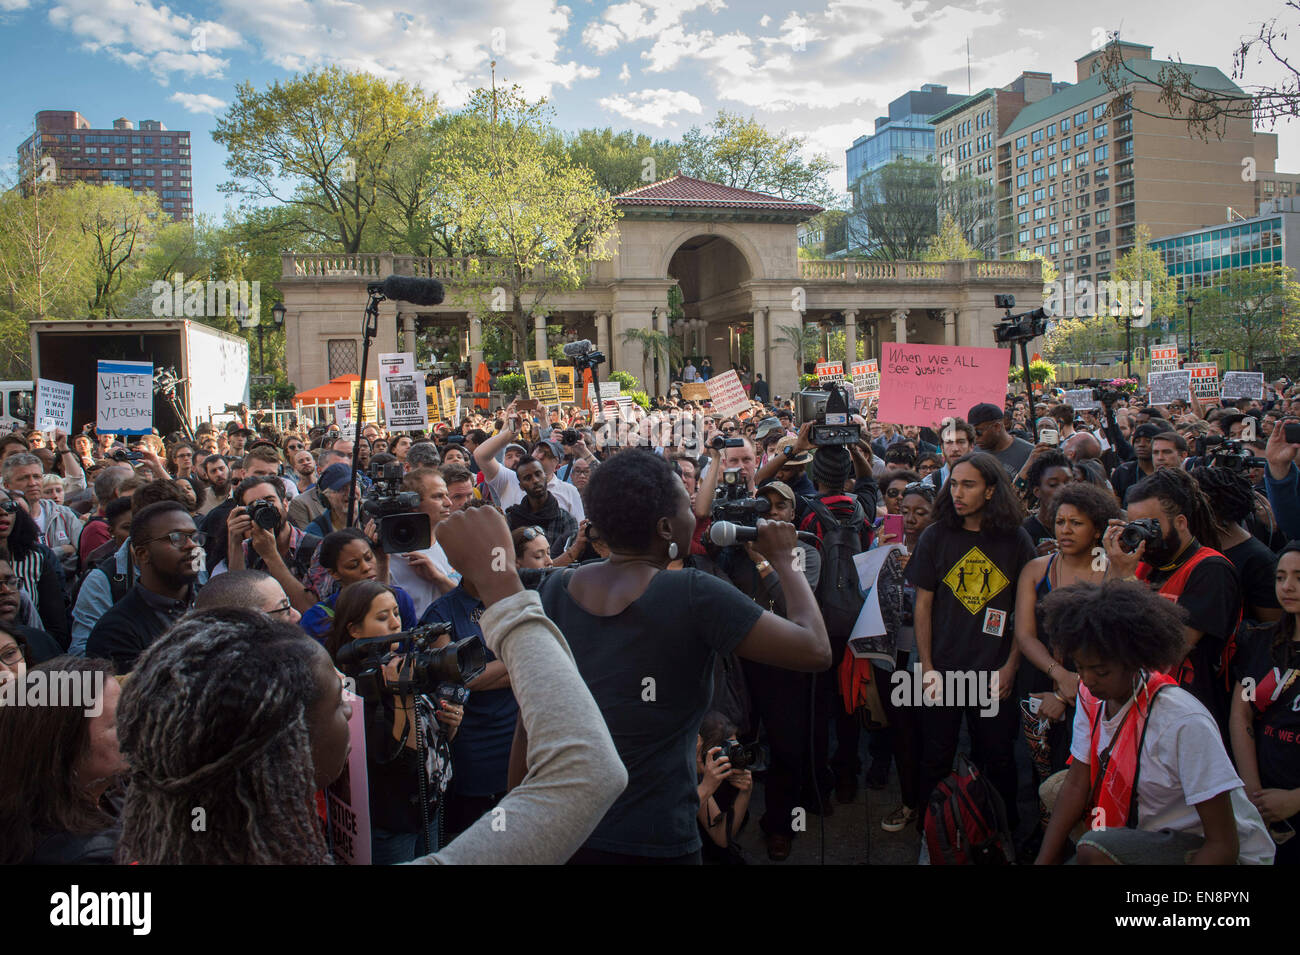 Manhattan, New York, USA. 29th Apr, 2015. Activists rally in Union Square in solidarity with Baltimore demanding justice for those responsible for the death of Freddie Gray, Wed., April 29, 2015. Credit:  Bryan Smith/ZUMA Wire/ZUMAPRESS.com/Alamy Live News Stock Photo